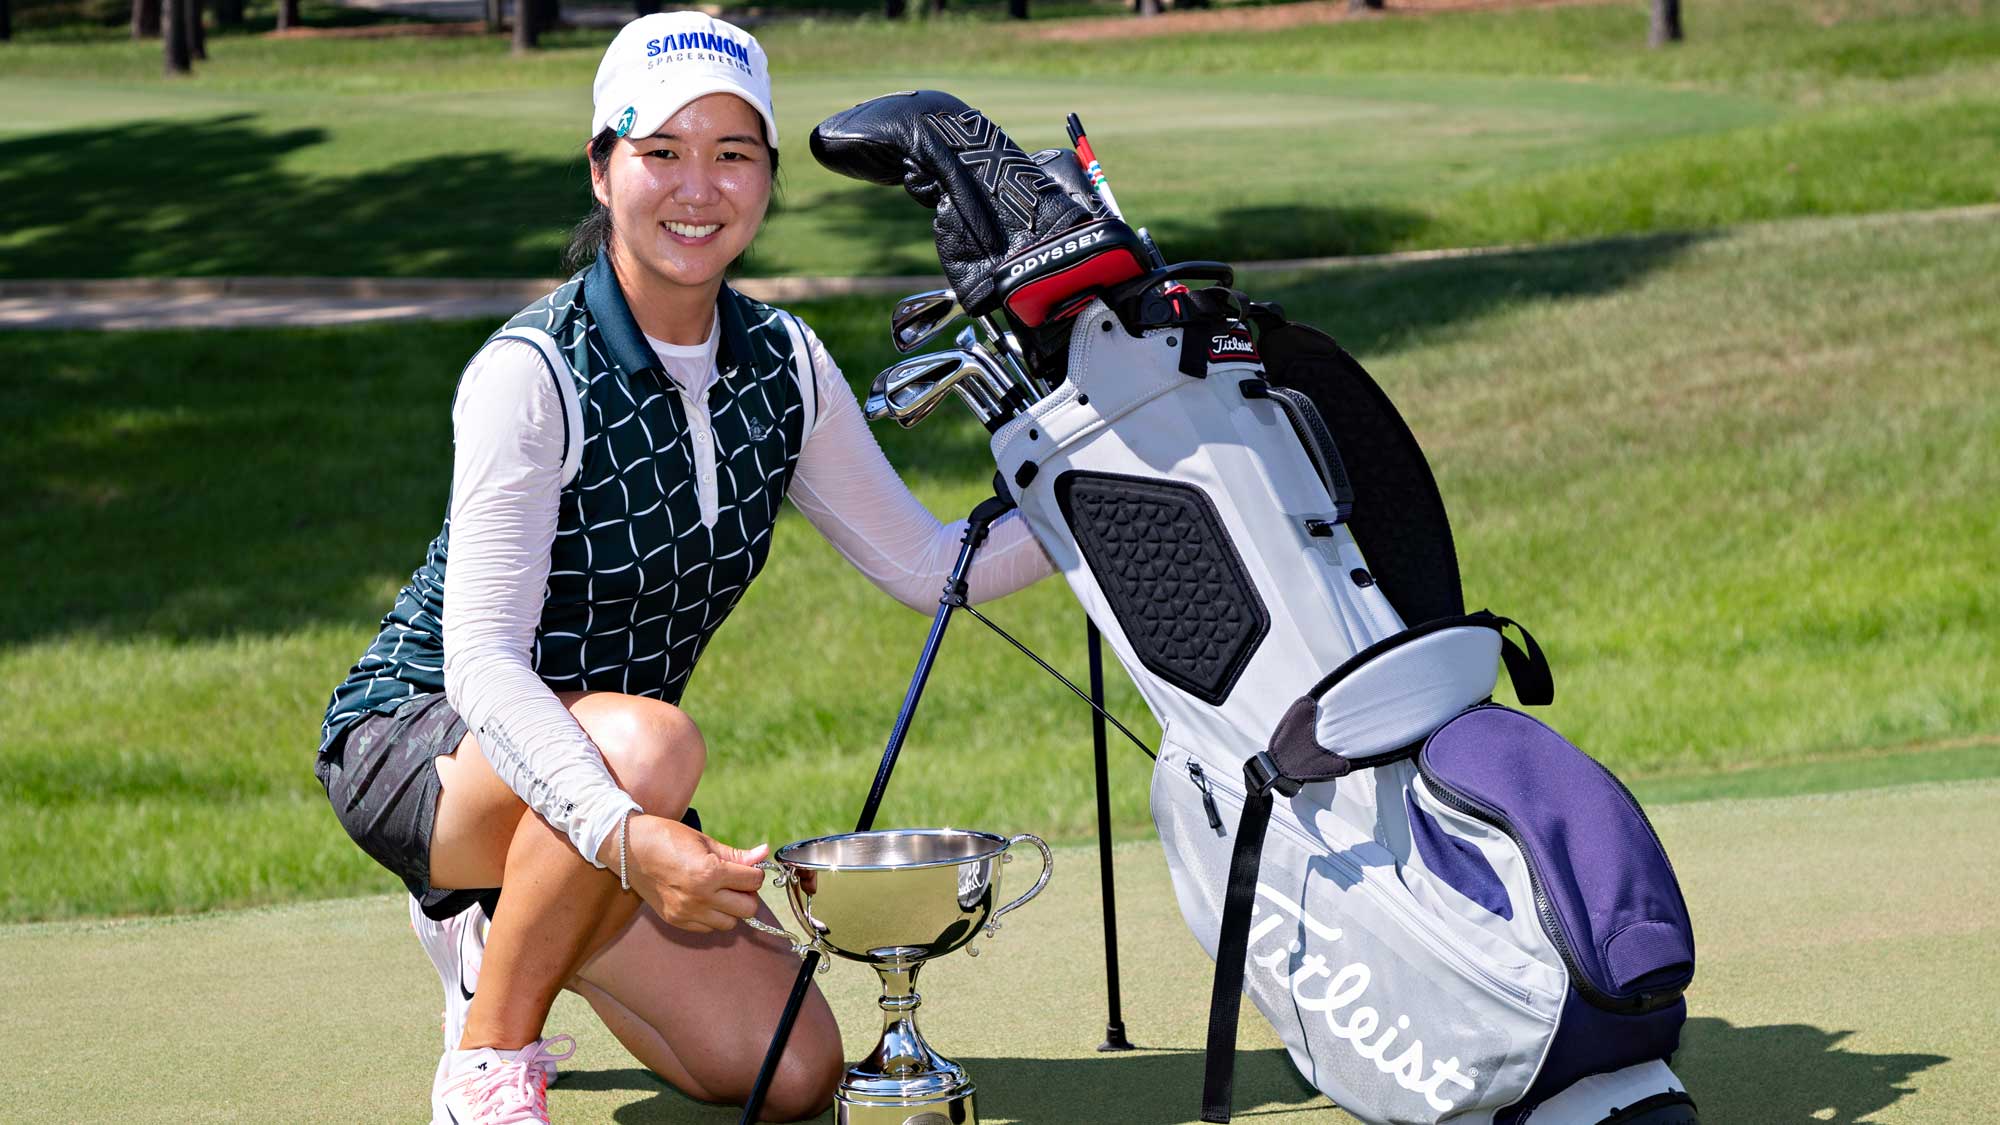 Hyemin Kim poses with the trophy after winning the 2018 Murphy USA El Dorado Shootout